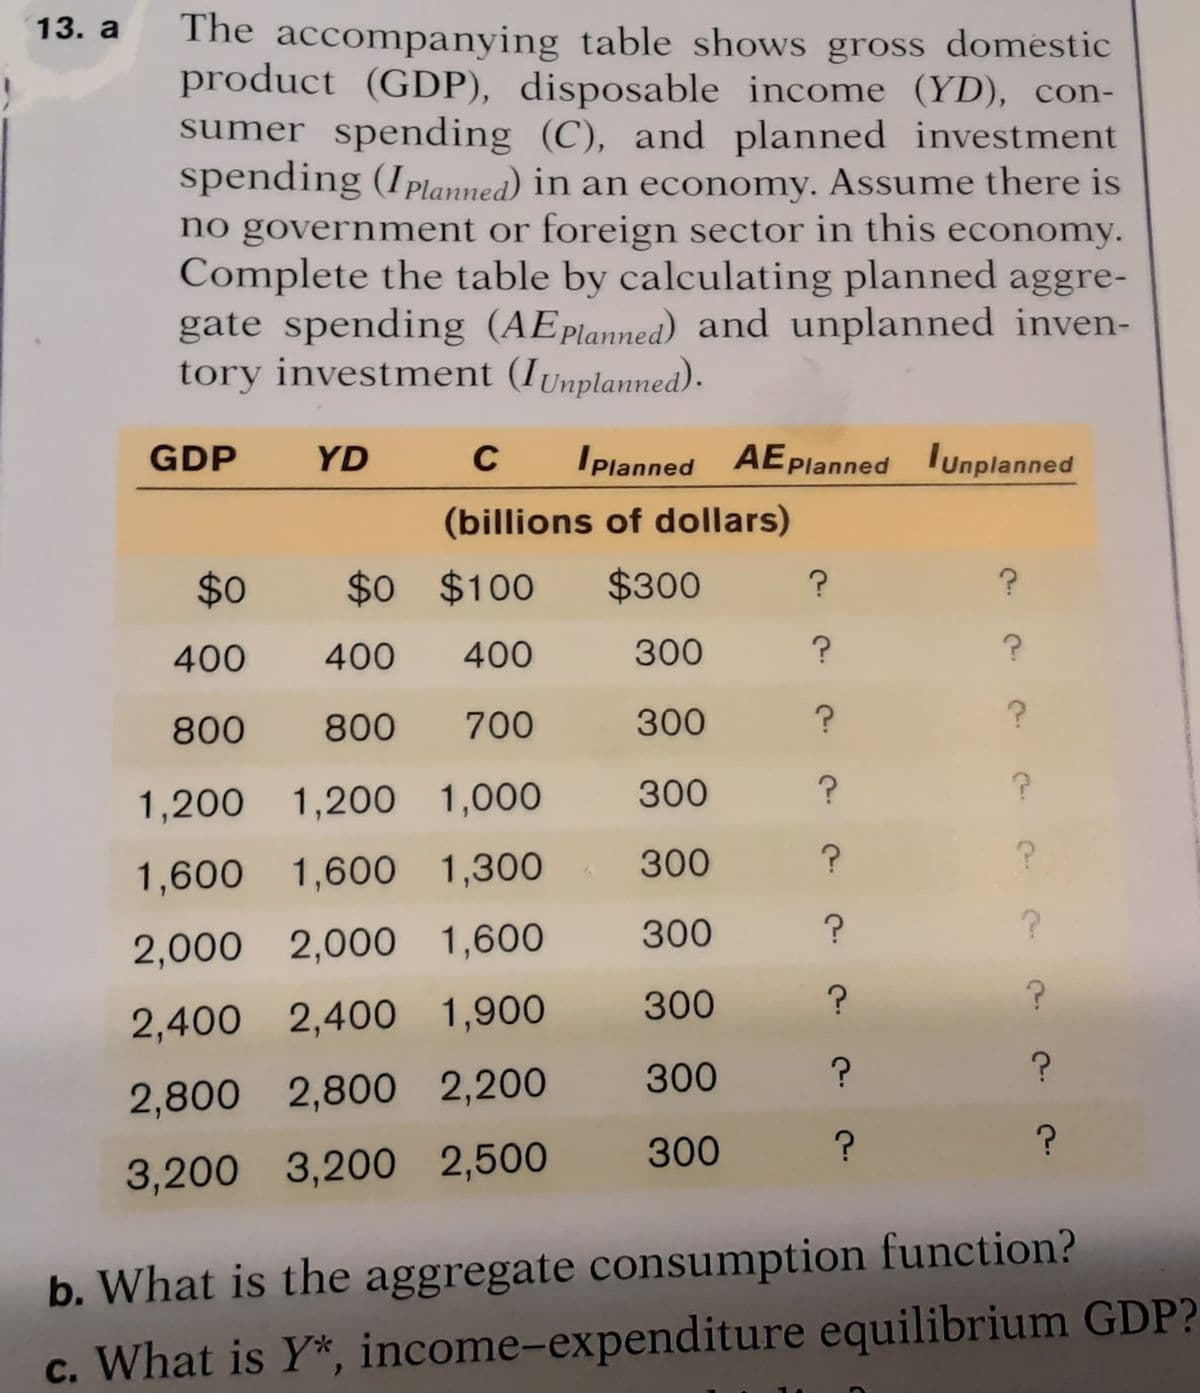 13. а
The accompanying table shows gross domestic
product (GDP), disposable income (YD), con-
sumer spending (C), and planned investment
spending (Iplanned) in an economy. Assume there is
no government or foreign sector in this economy.
Complete the table by calculating planned aggre-
gate spending (AEplanned) and unplanned inven-
tory investment (IUnplanned).
GDP
YD
C
IPlanned AEPlanned Unplanned
(billions of dollars)
$0
$0 $100
$300
400
400
400
300
800
800
700
300
1,200 1,200 1,000
300
300
1,600 1,600 1,300
300
?
2,000 2,000 1,600
300
2,400 2,400 1,900
300
2,800 2,800 2,200
300
3,200 3,200 2,500
b. What is the aggregate consumption function?
c. What is Y*, income-expenditure equilibrium GDP?
